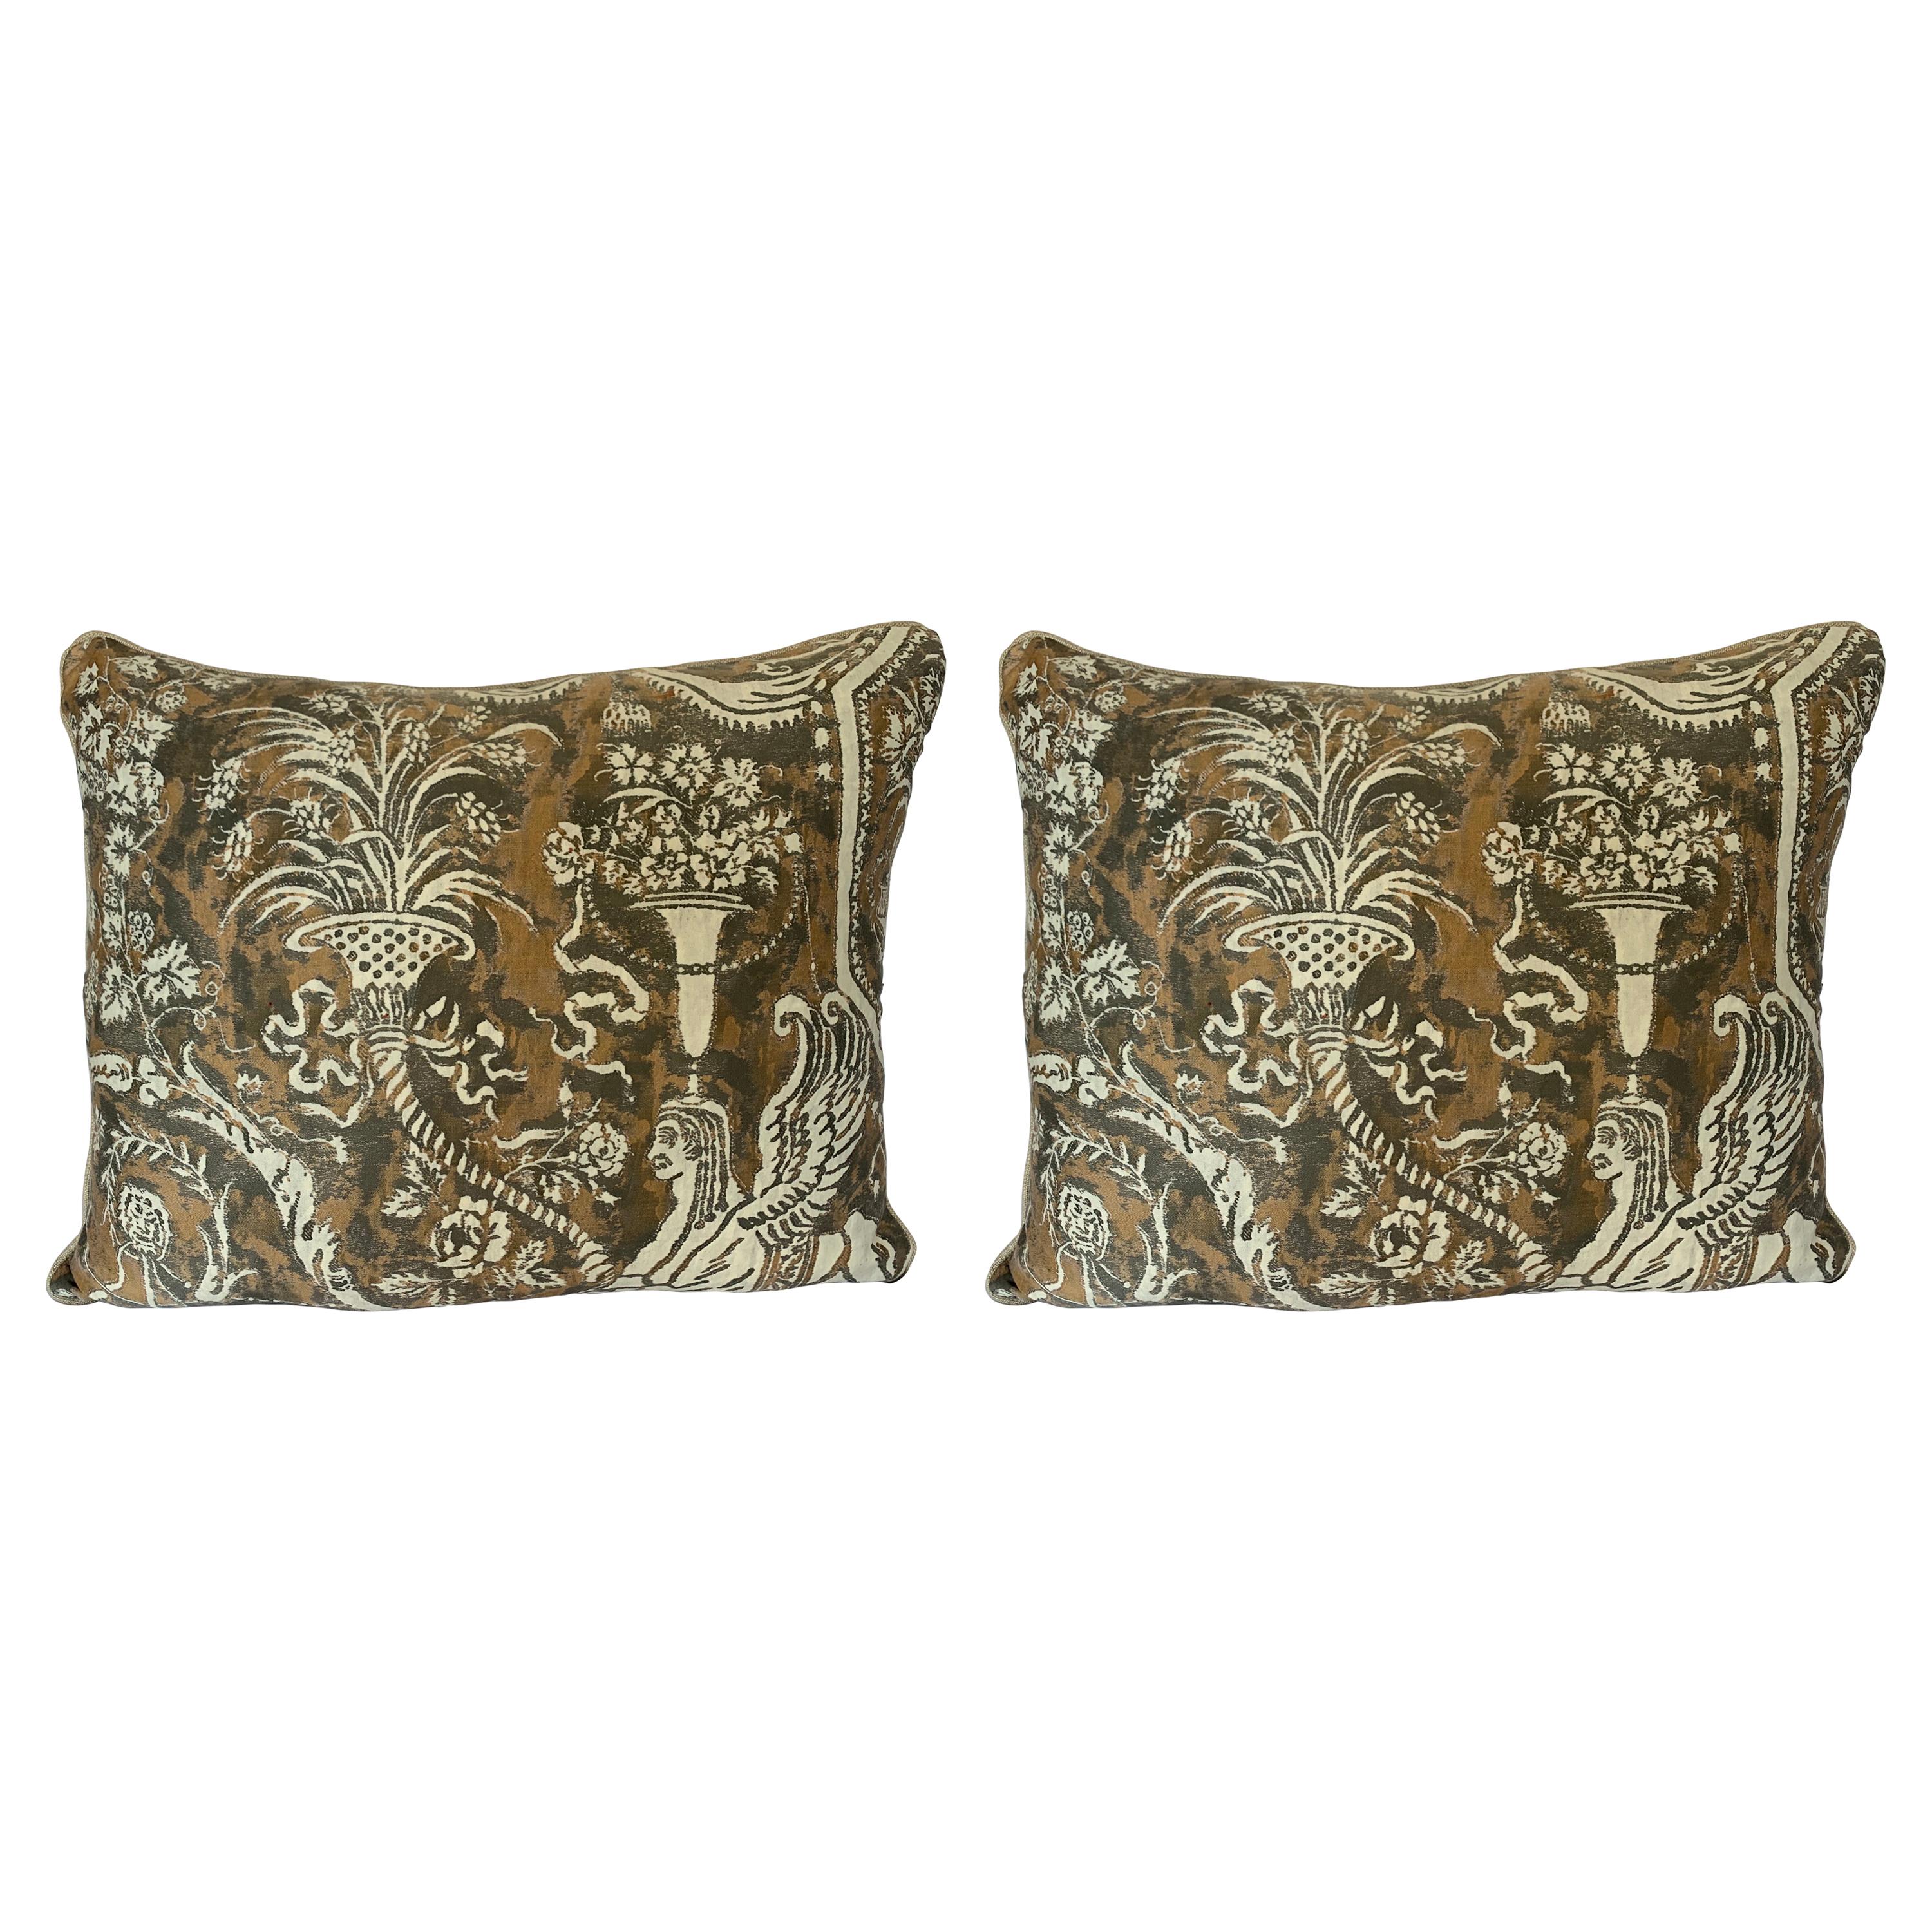 Pair of Unique Fortuny Pillows w/ Sphinxes